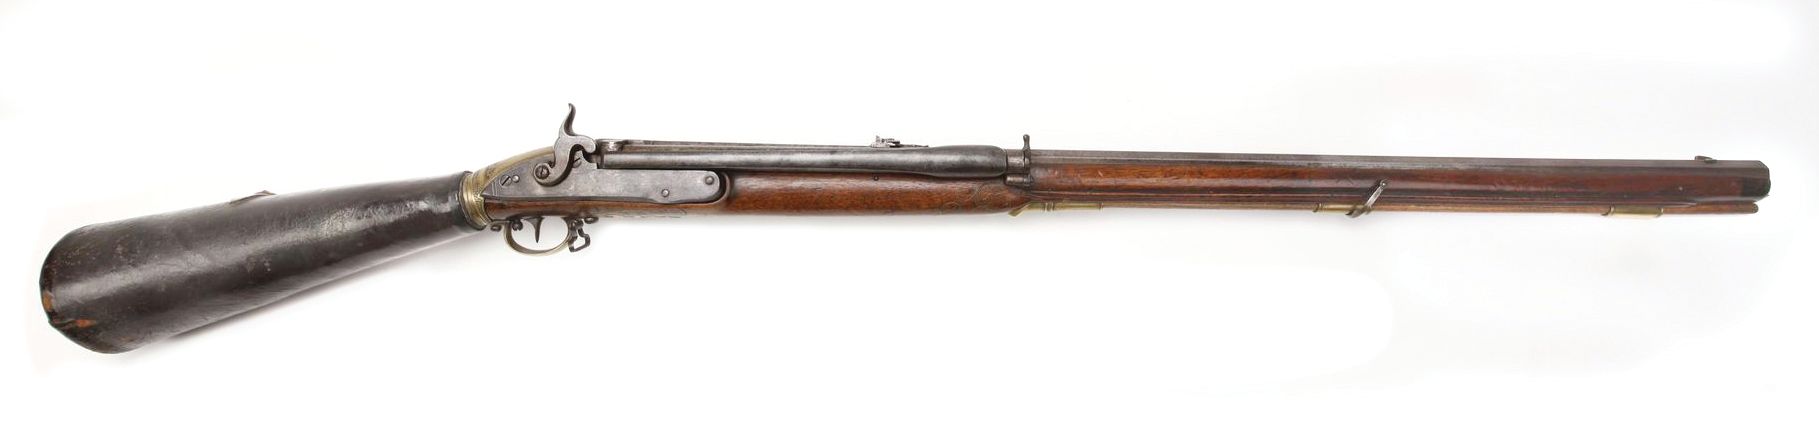 Girandoni air rifle with compressed air in the stock. © National Firearms Museum